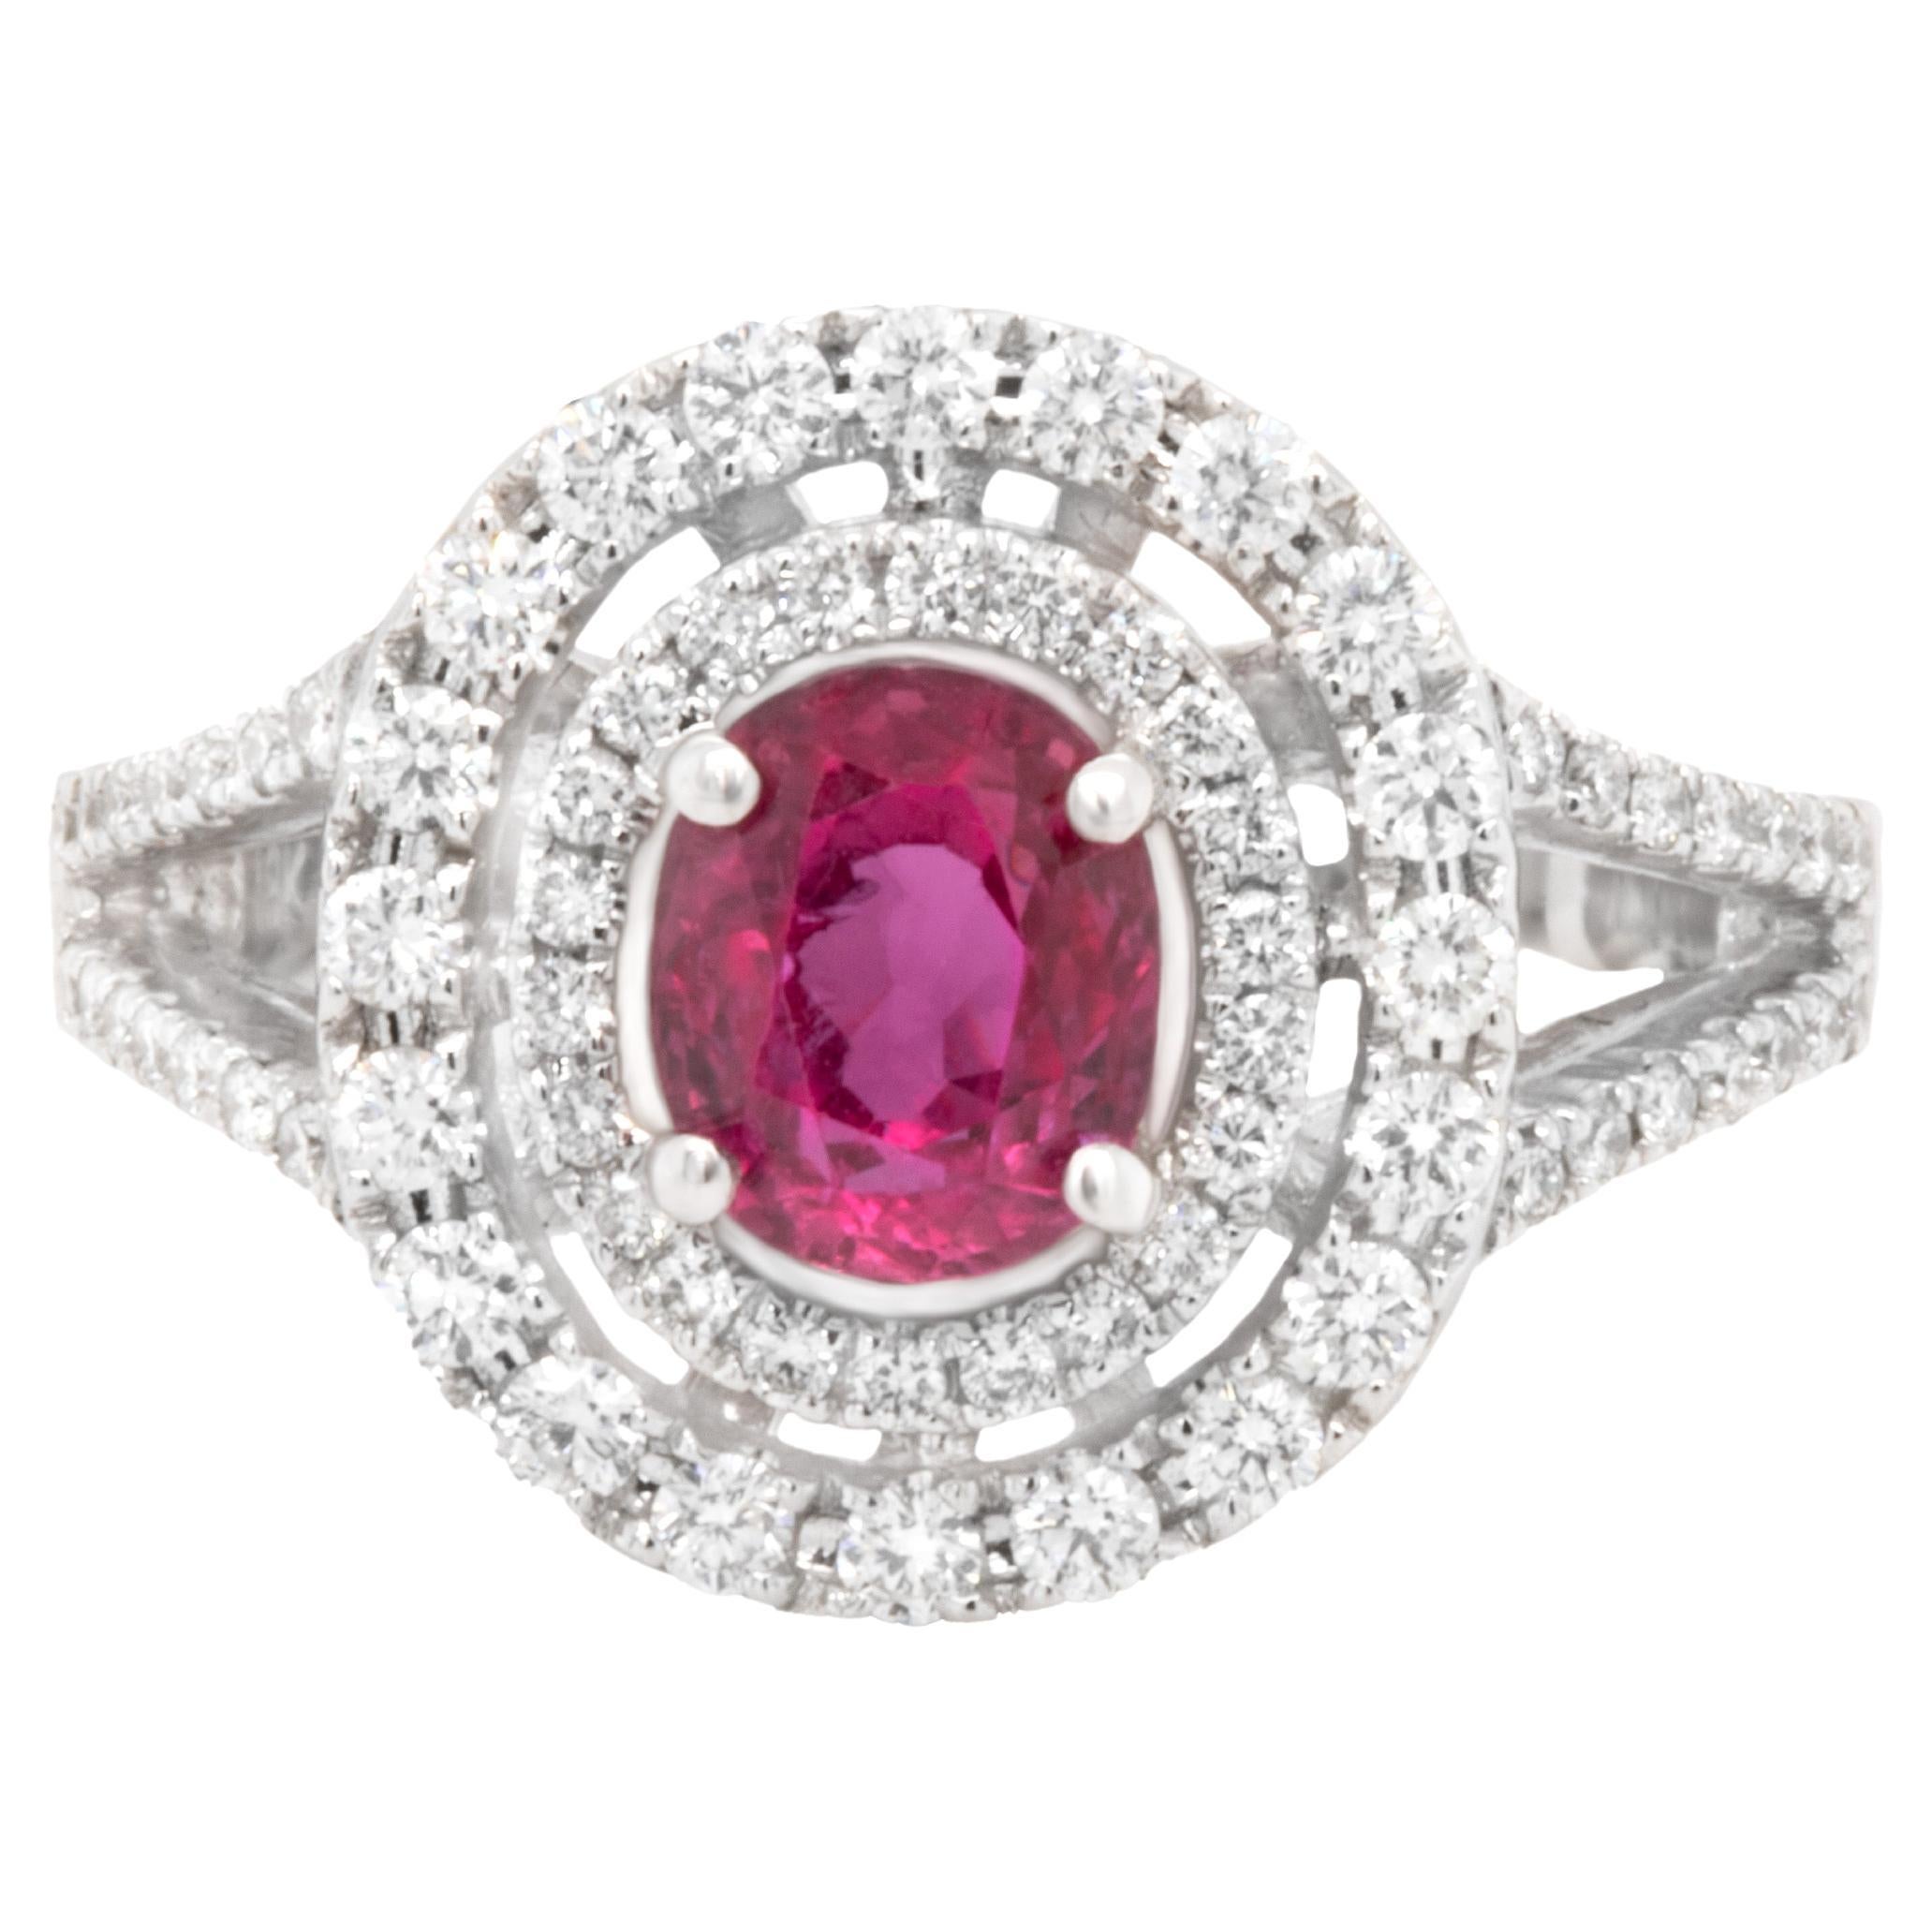 Very Fine Ruby Ring With Diamonds 3.78 Carats 18K White Gold